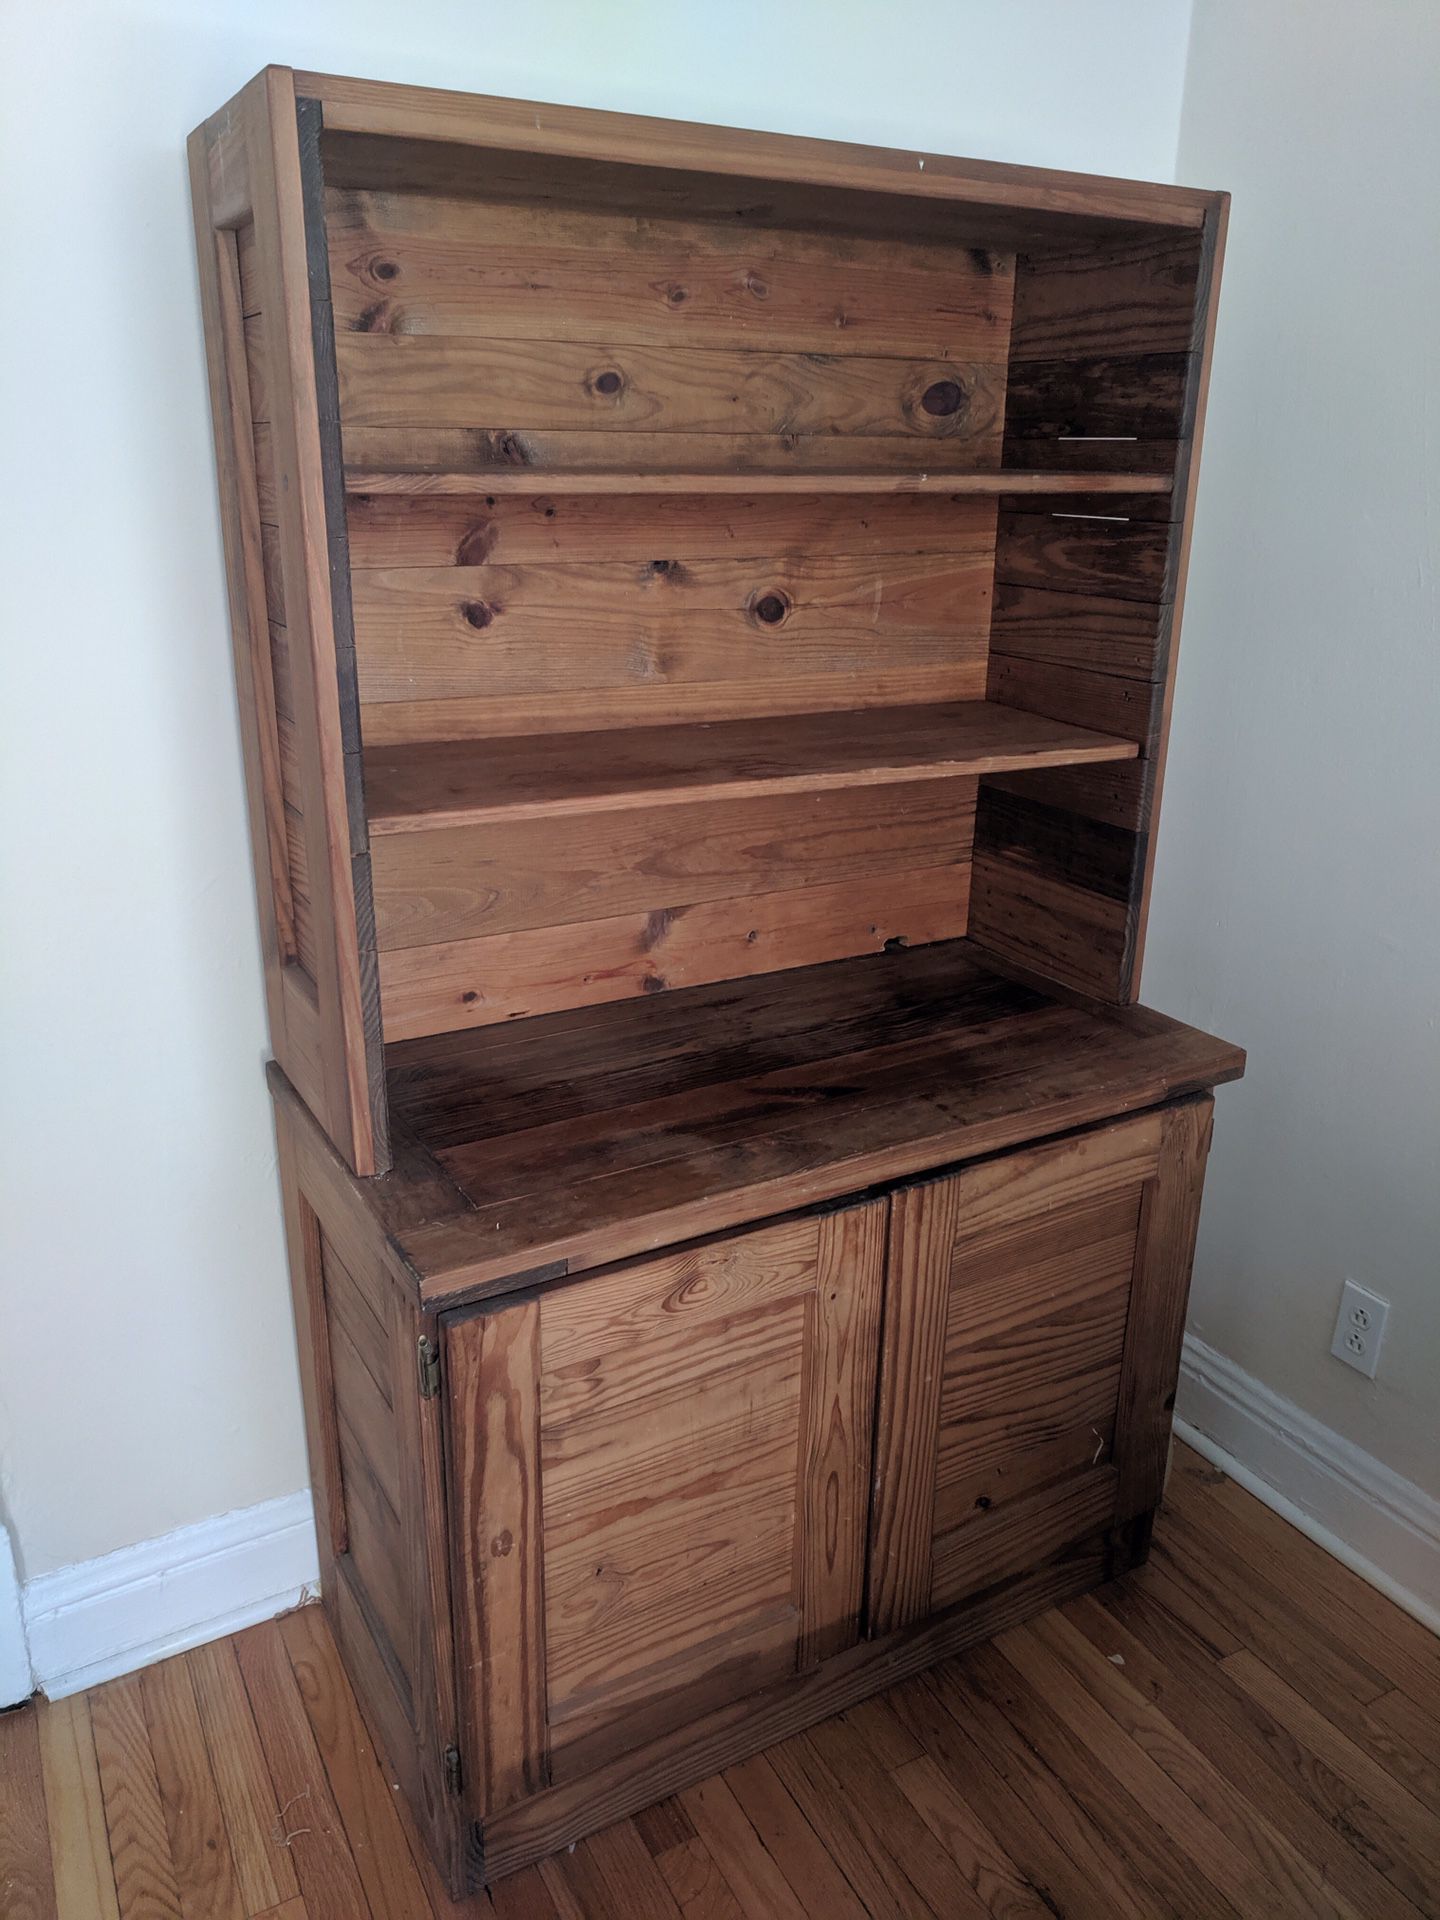 This End Up hutch cabinet and shelf